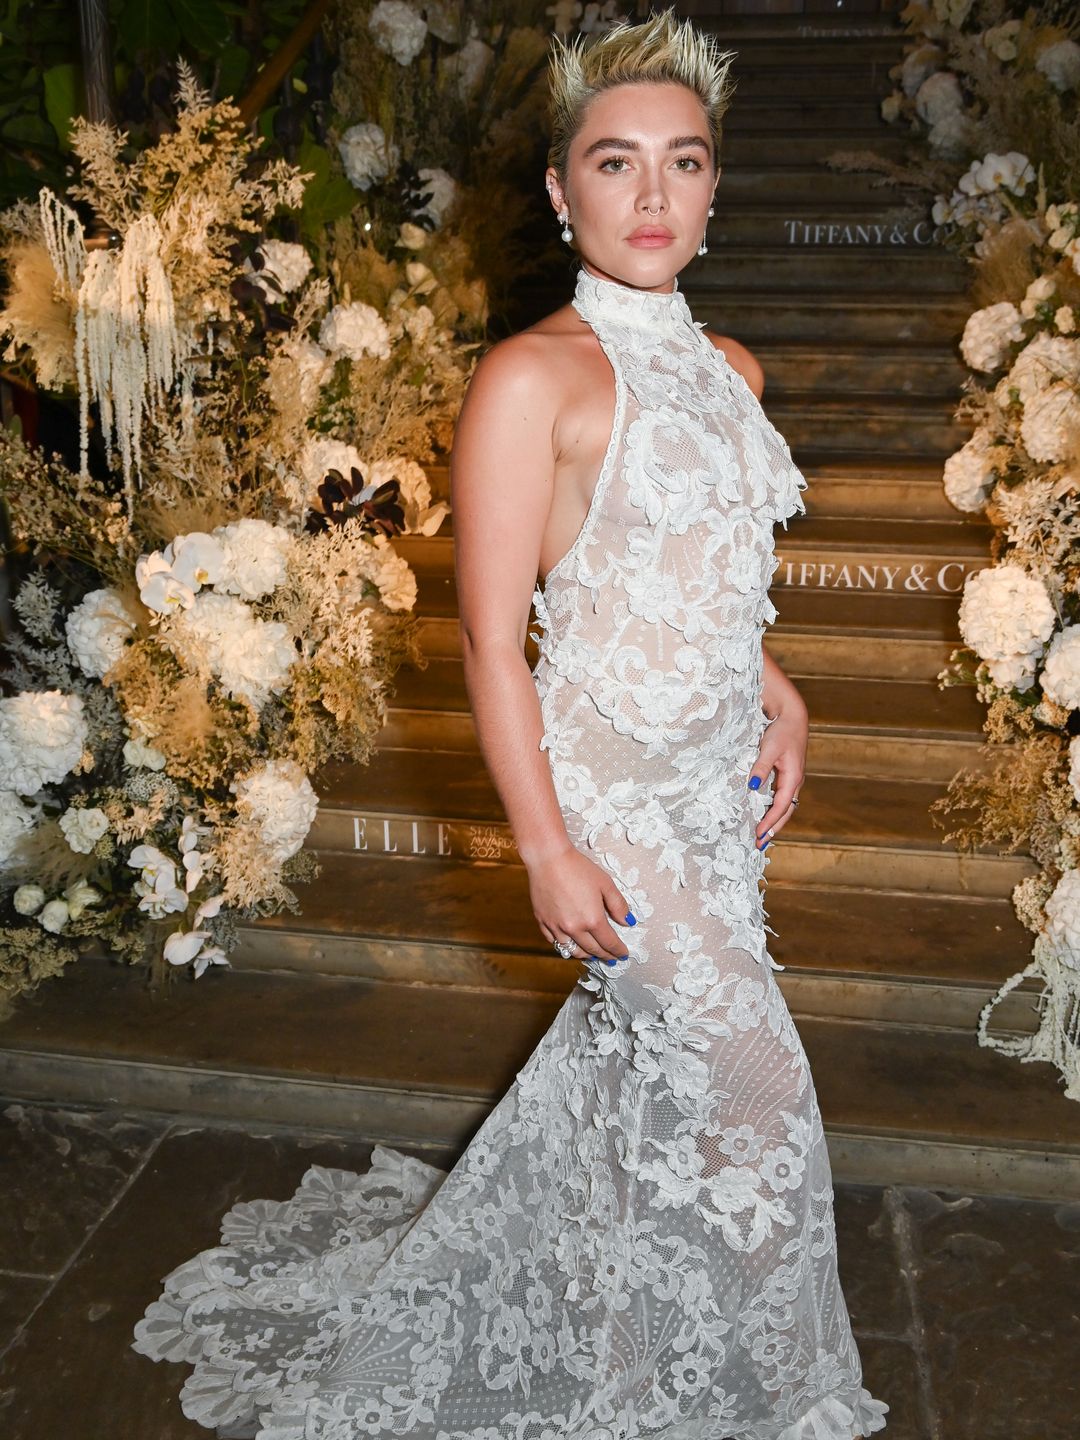 LONDON, ENGLAND - SEPTEMBER 05: Florence Pugh, winner of The British Icon Award attends the ELLE Style Awards 2023, in partnership with Tiffany & Co., Moet & Chandon, and Snapchat, at The Old Sessions House on September 5, 2023 in London, England. (Photo by Dave Benett/Getty Images for ELLE Style Awards 2023)